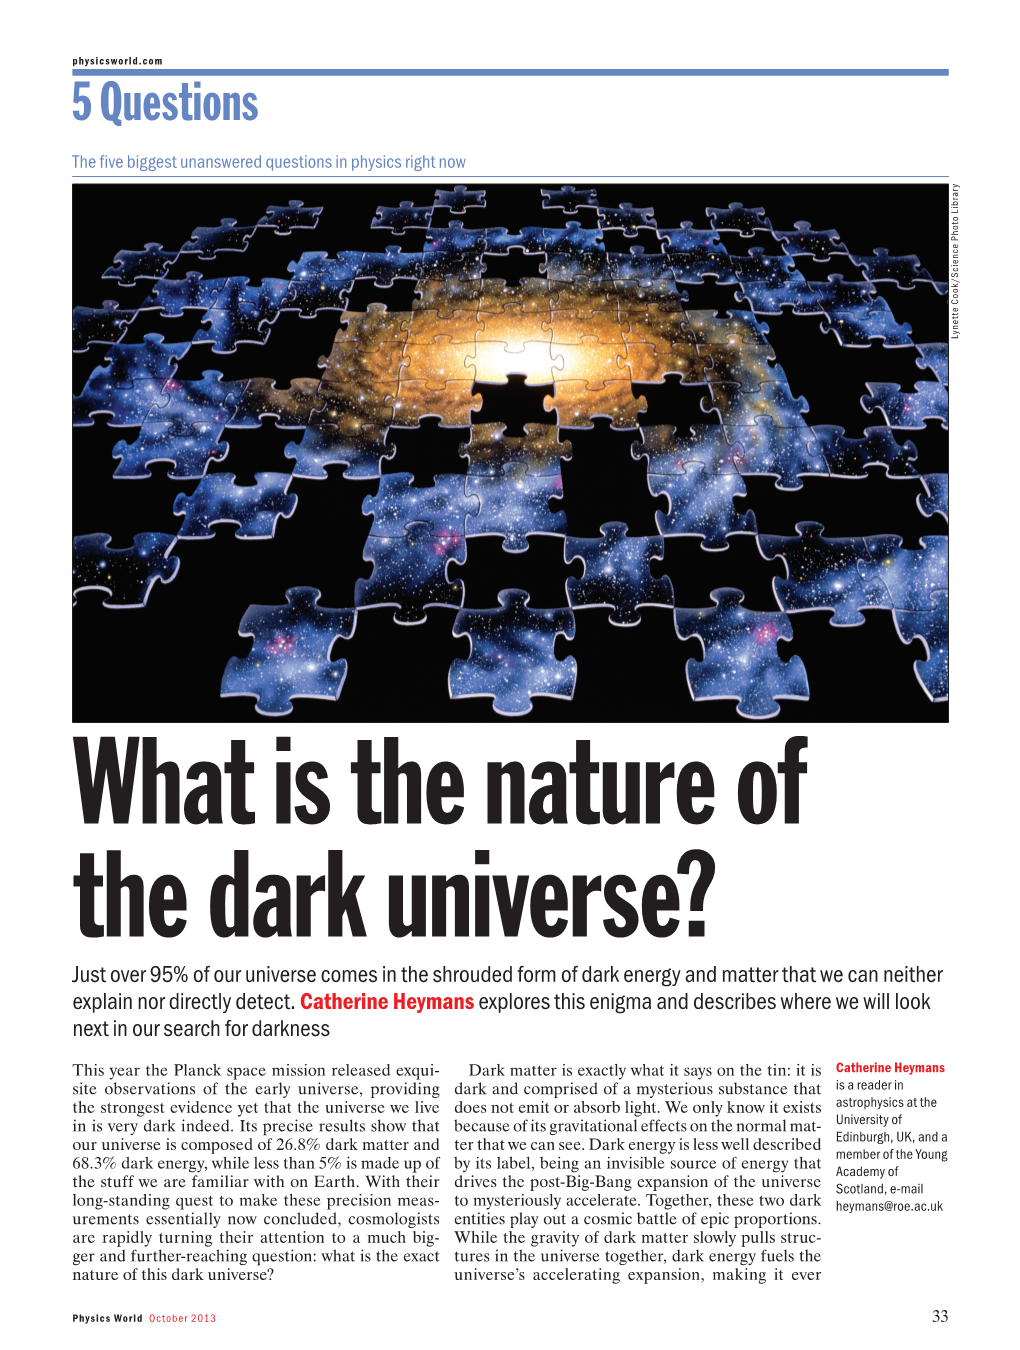 Dark Universe? Just Over 95% of Our Universe Comes in the Shrouded Form of Dark Energy and Matter That We Can Neither Explain Nor Directly Detect